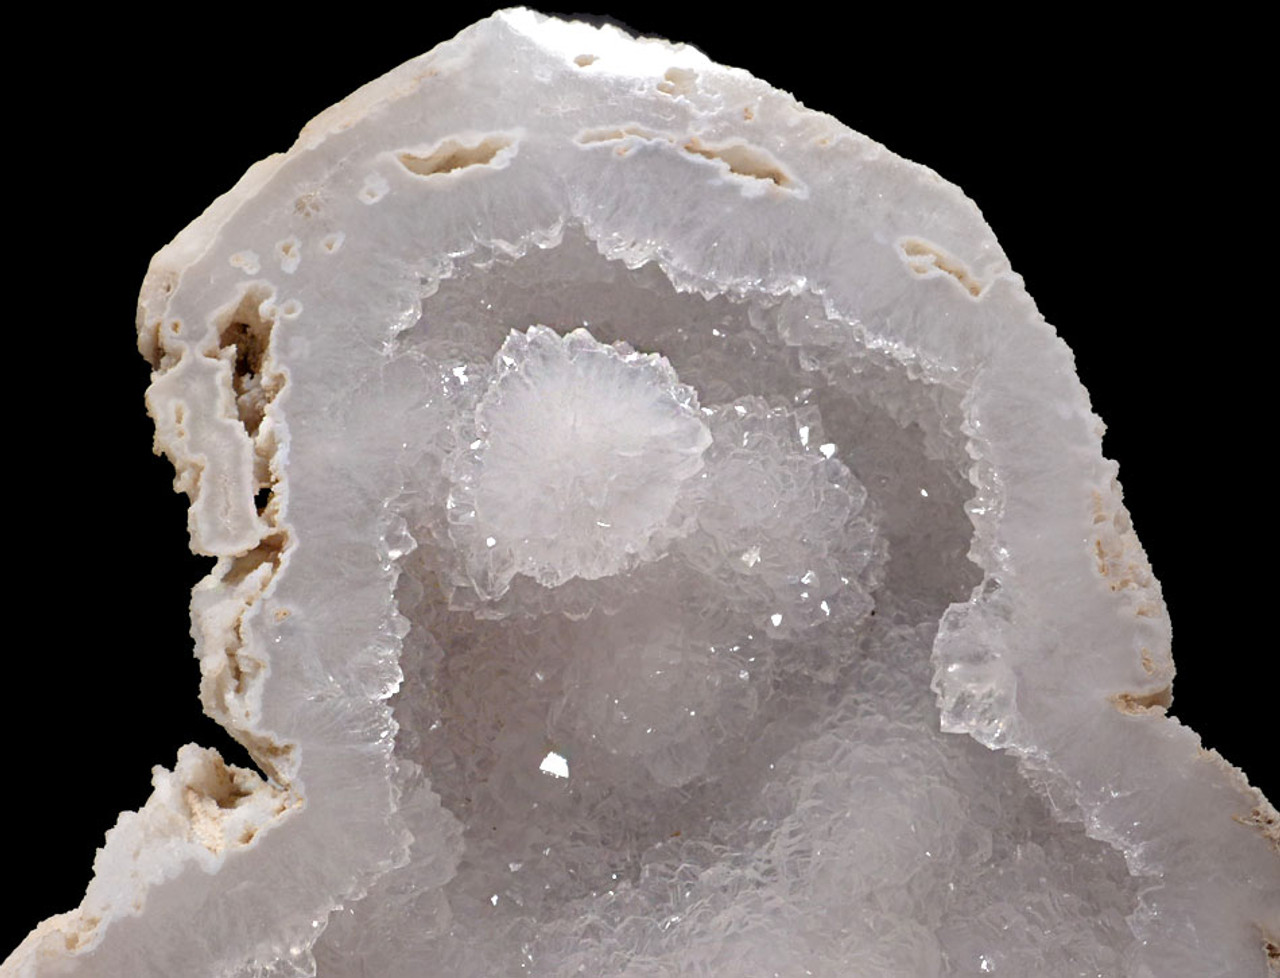 COR121 - ULTRA-RARE LARGE  "ICE CAVE" COMPLETE FOSSIL CORAL COLONY GEODE WITH LARGE QUARTZ CRYSTALS LINING CAVITY